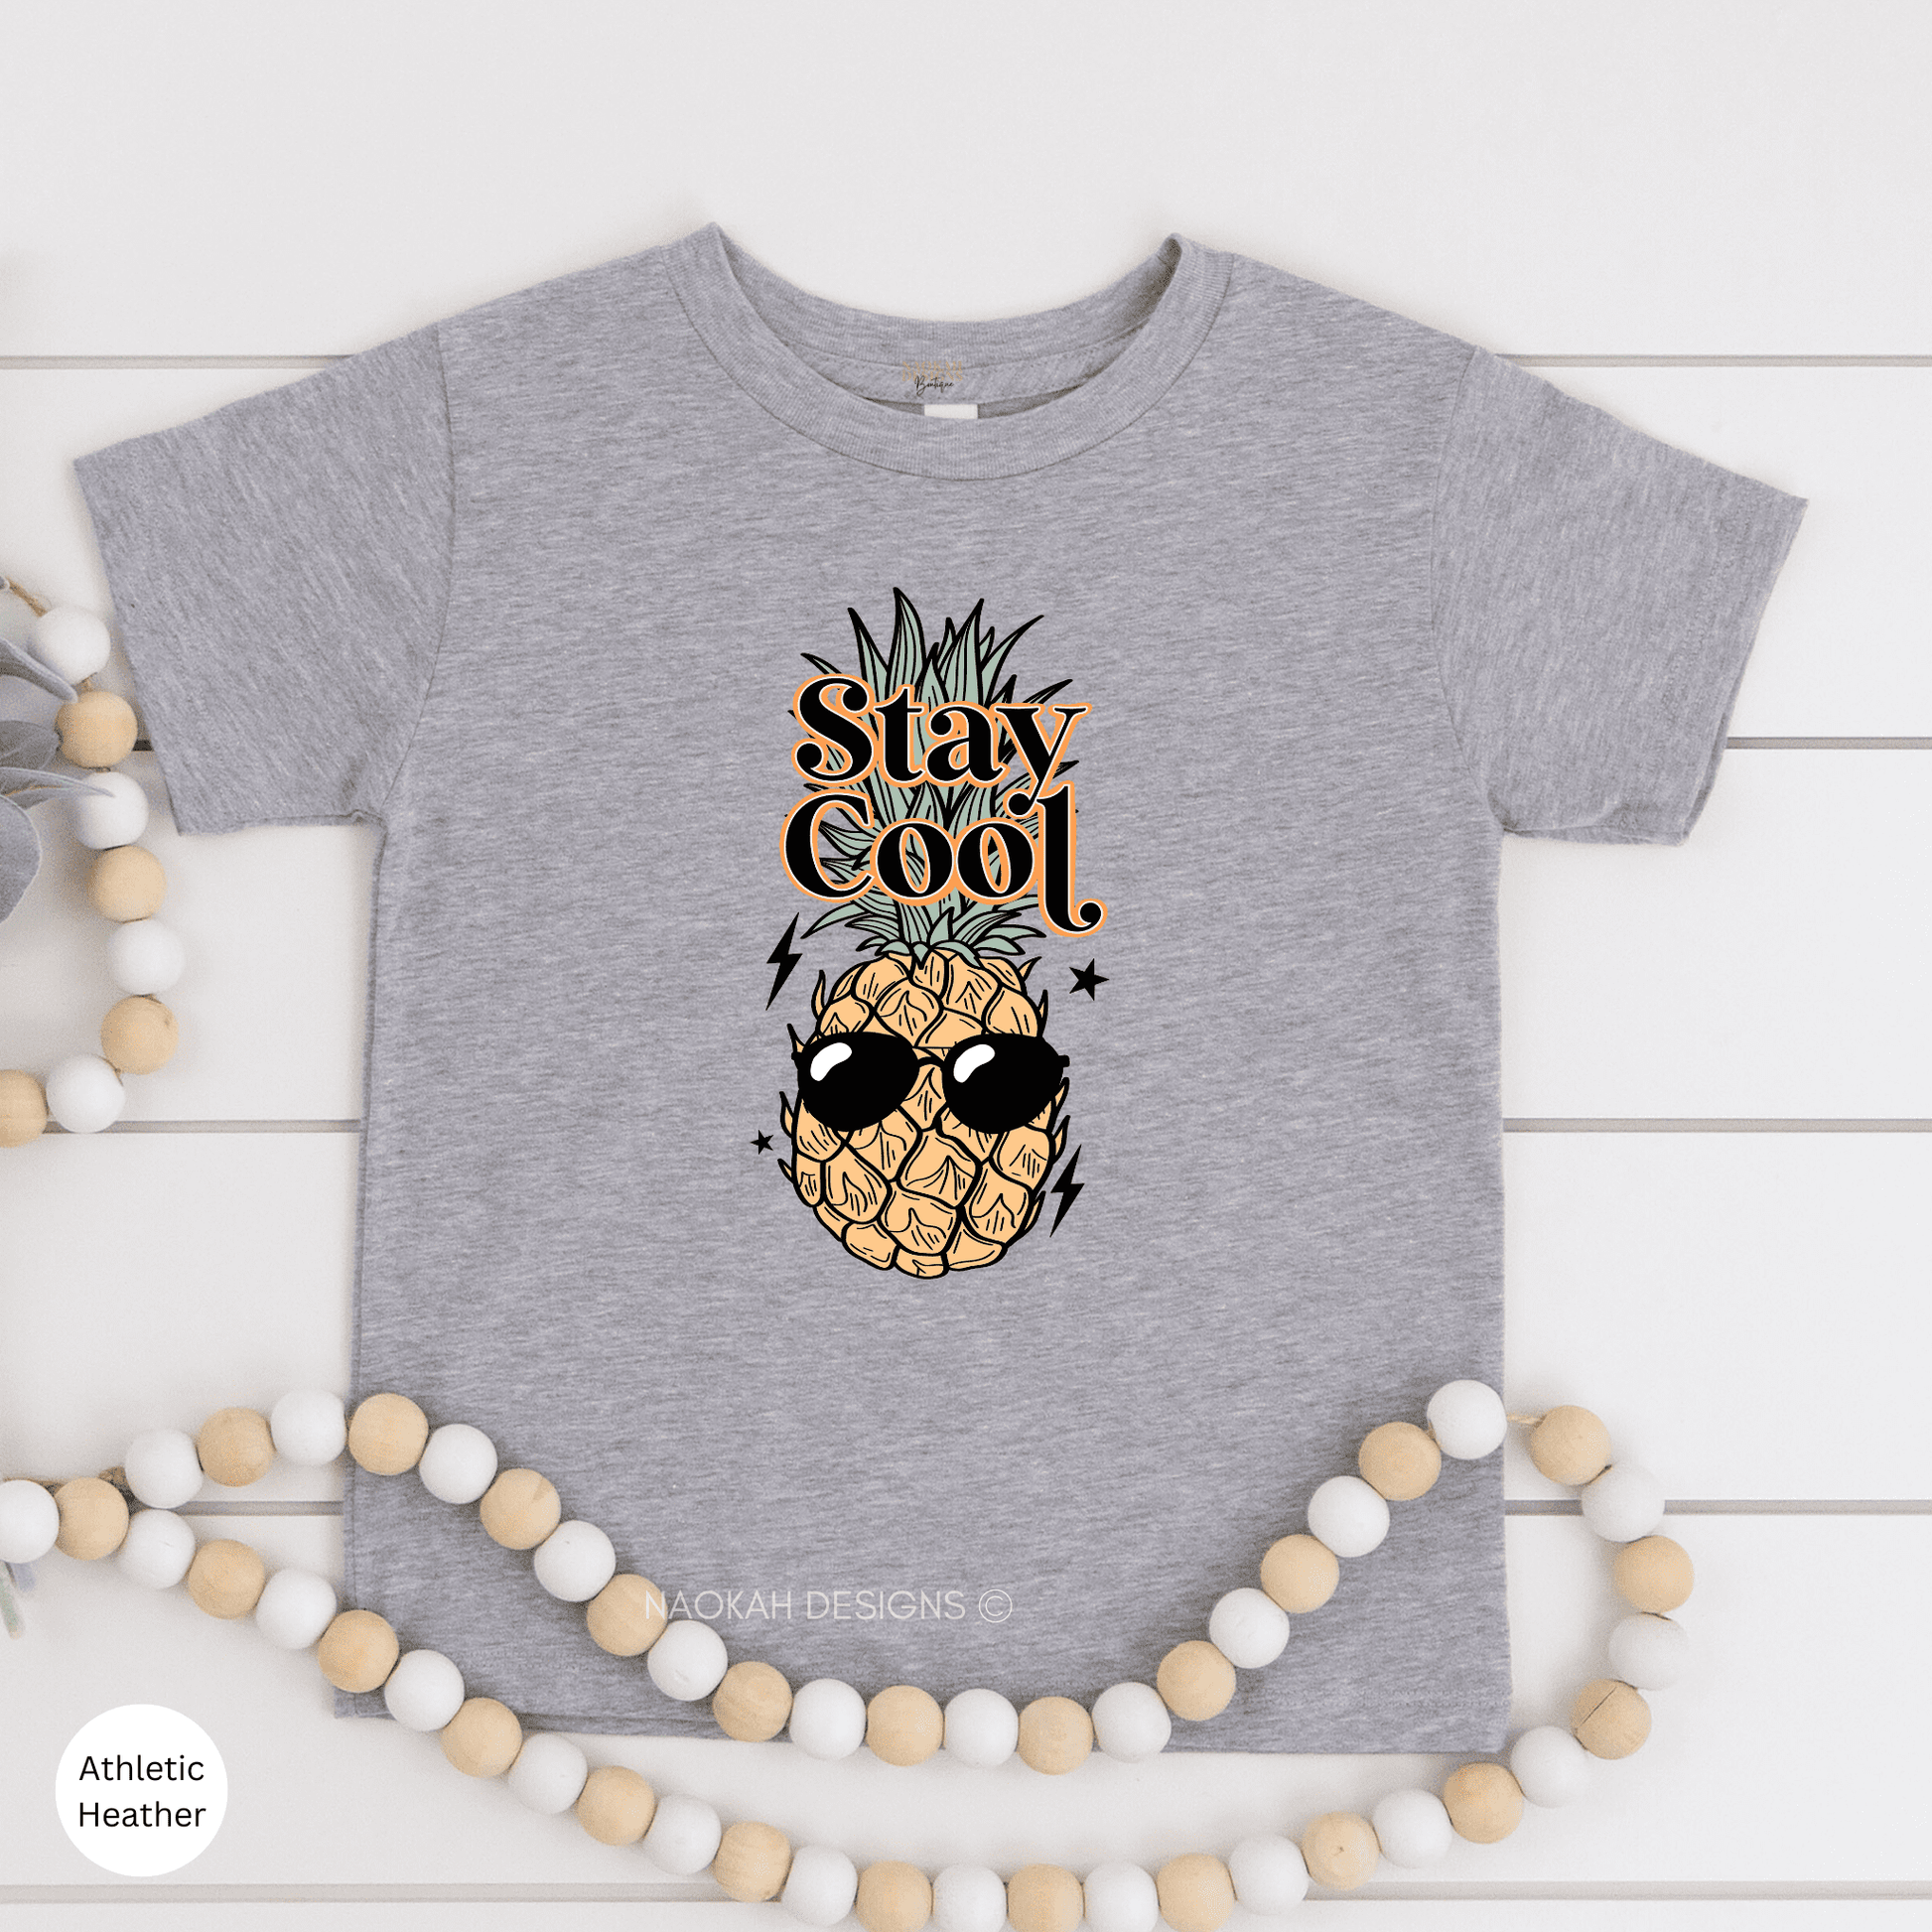 Stay Sweet, Stay Cool Pineapple Shirt, Toddler Pineapple Shirt, Kids Stay Cool Pineapple Shirt, Youth Stay Sweet Pineapple Shirt, IVF Mom Shirt, IVF Kids Shirt, Infertility Tee